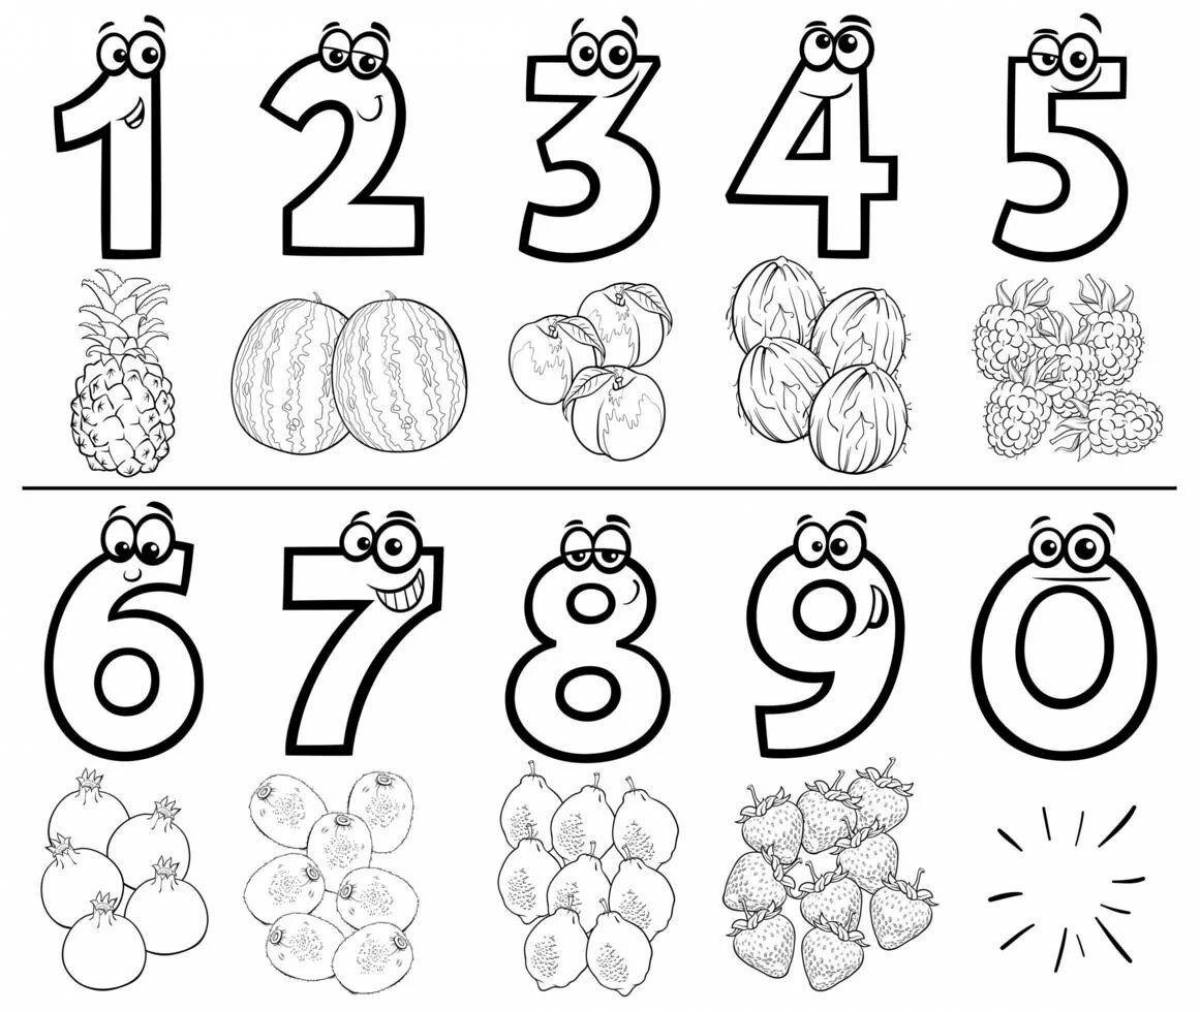 Color crazy counting up to 10 coloring pages for preschoolers